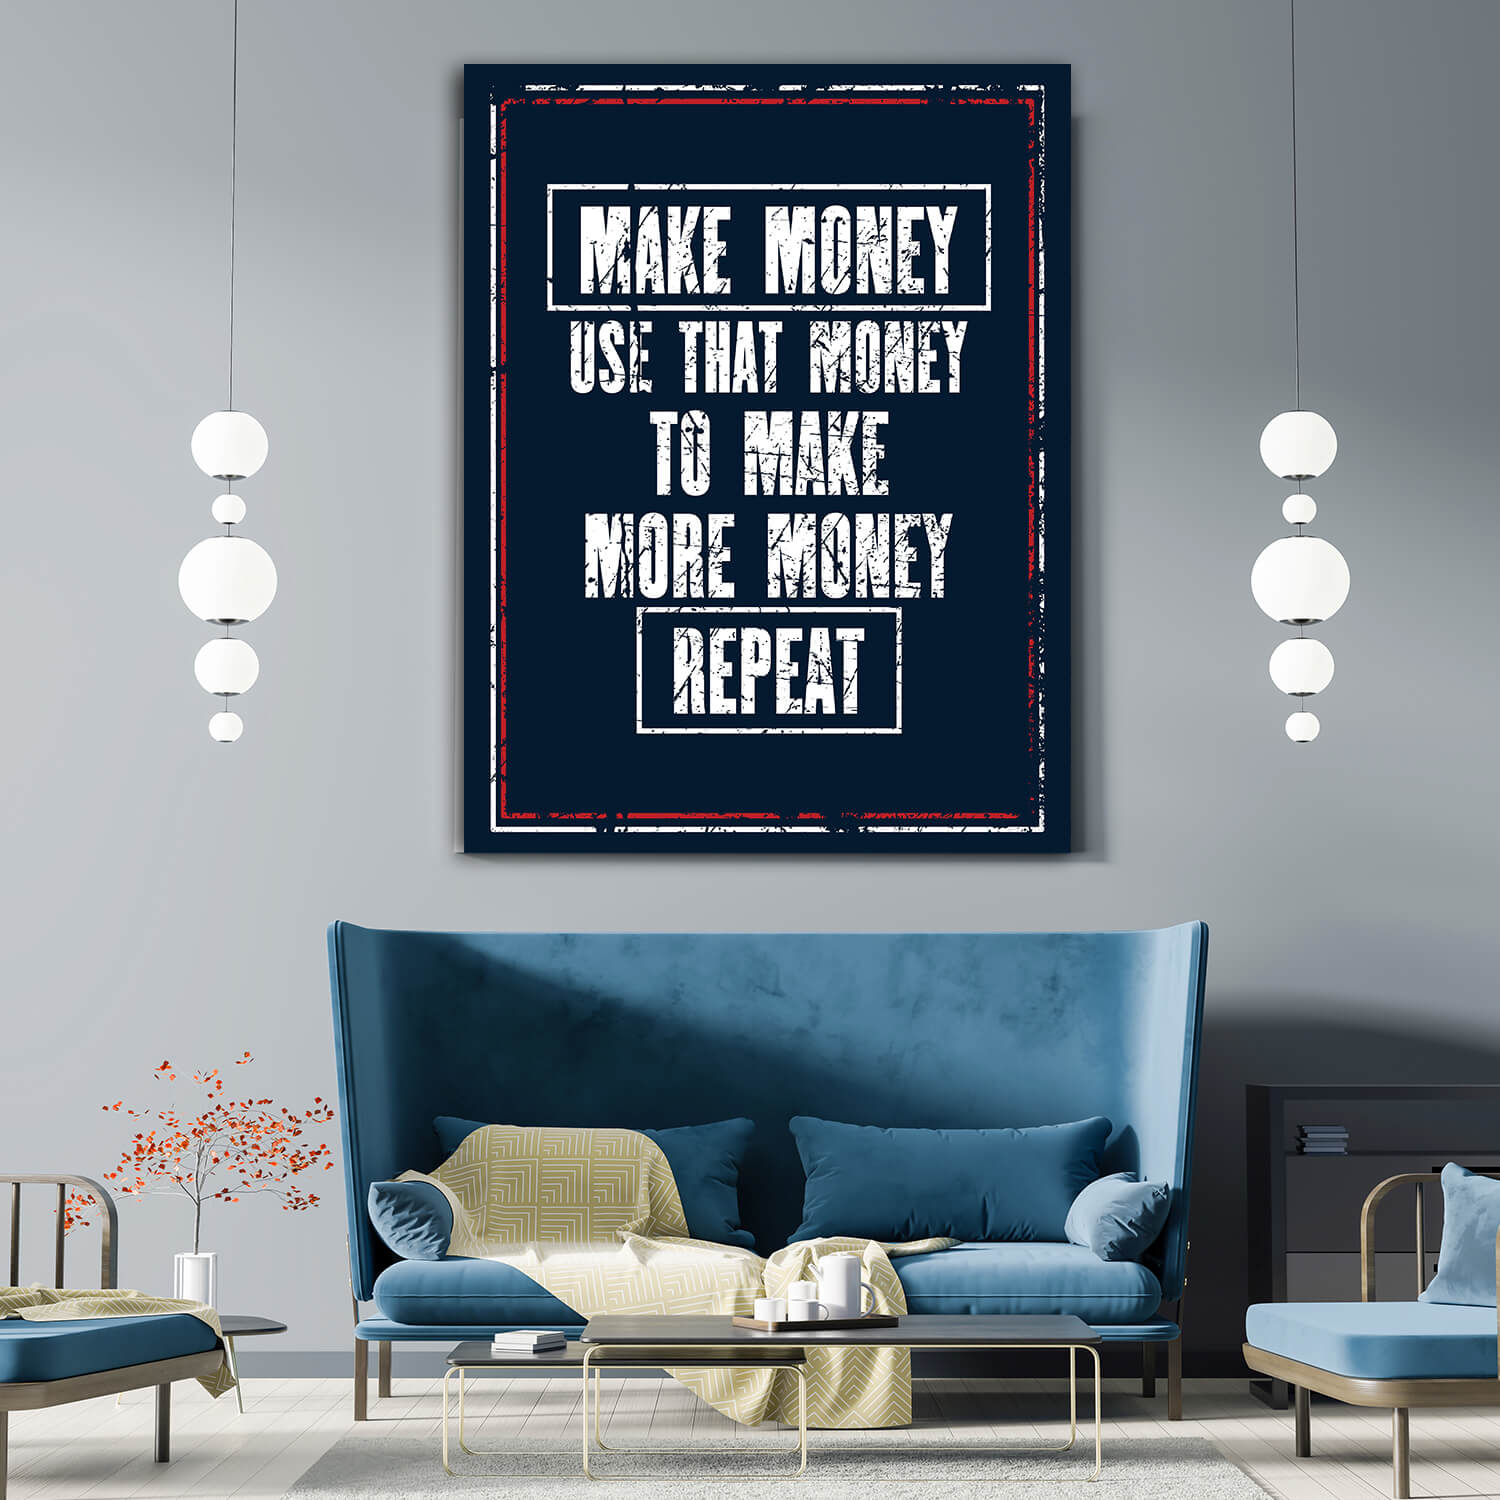 W1_0019_M&P_0013_PRINT__0020_32765842_Motivation Quote MAKE MONEY USE THAT MONEY TO MAKE MORE MONEY REPEAT AOA10835